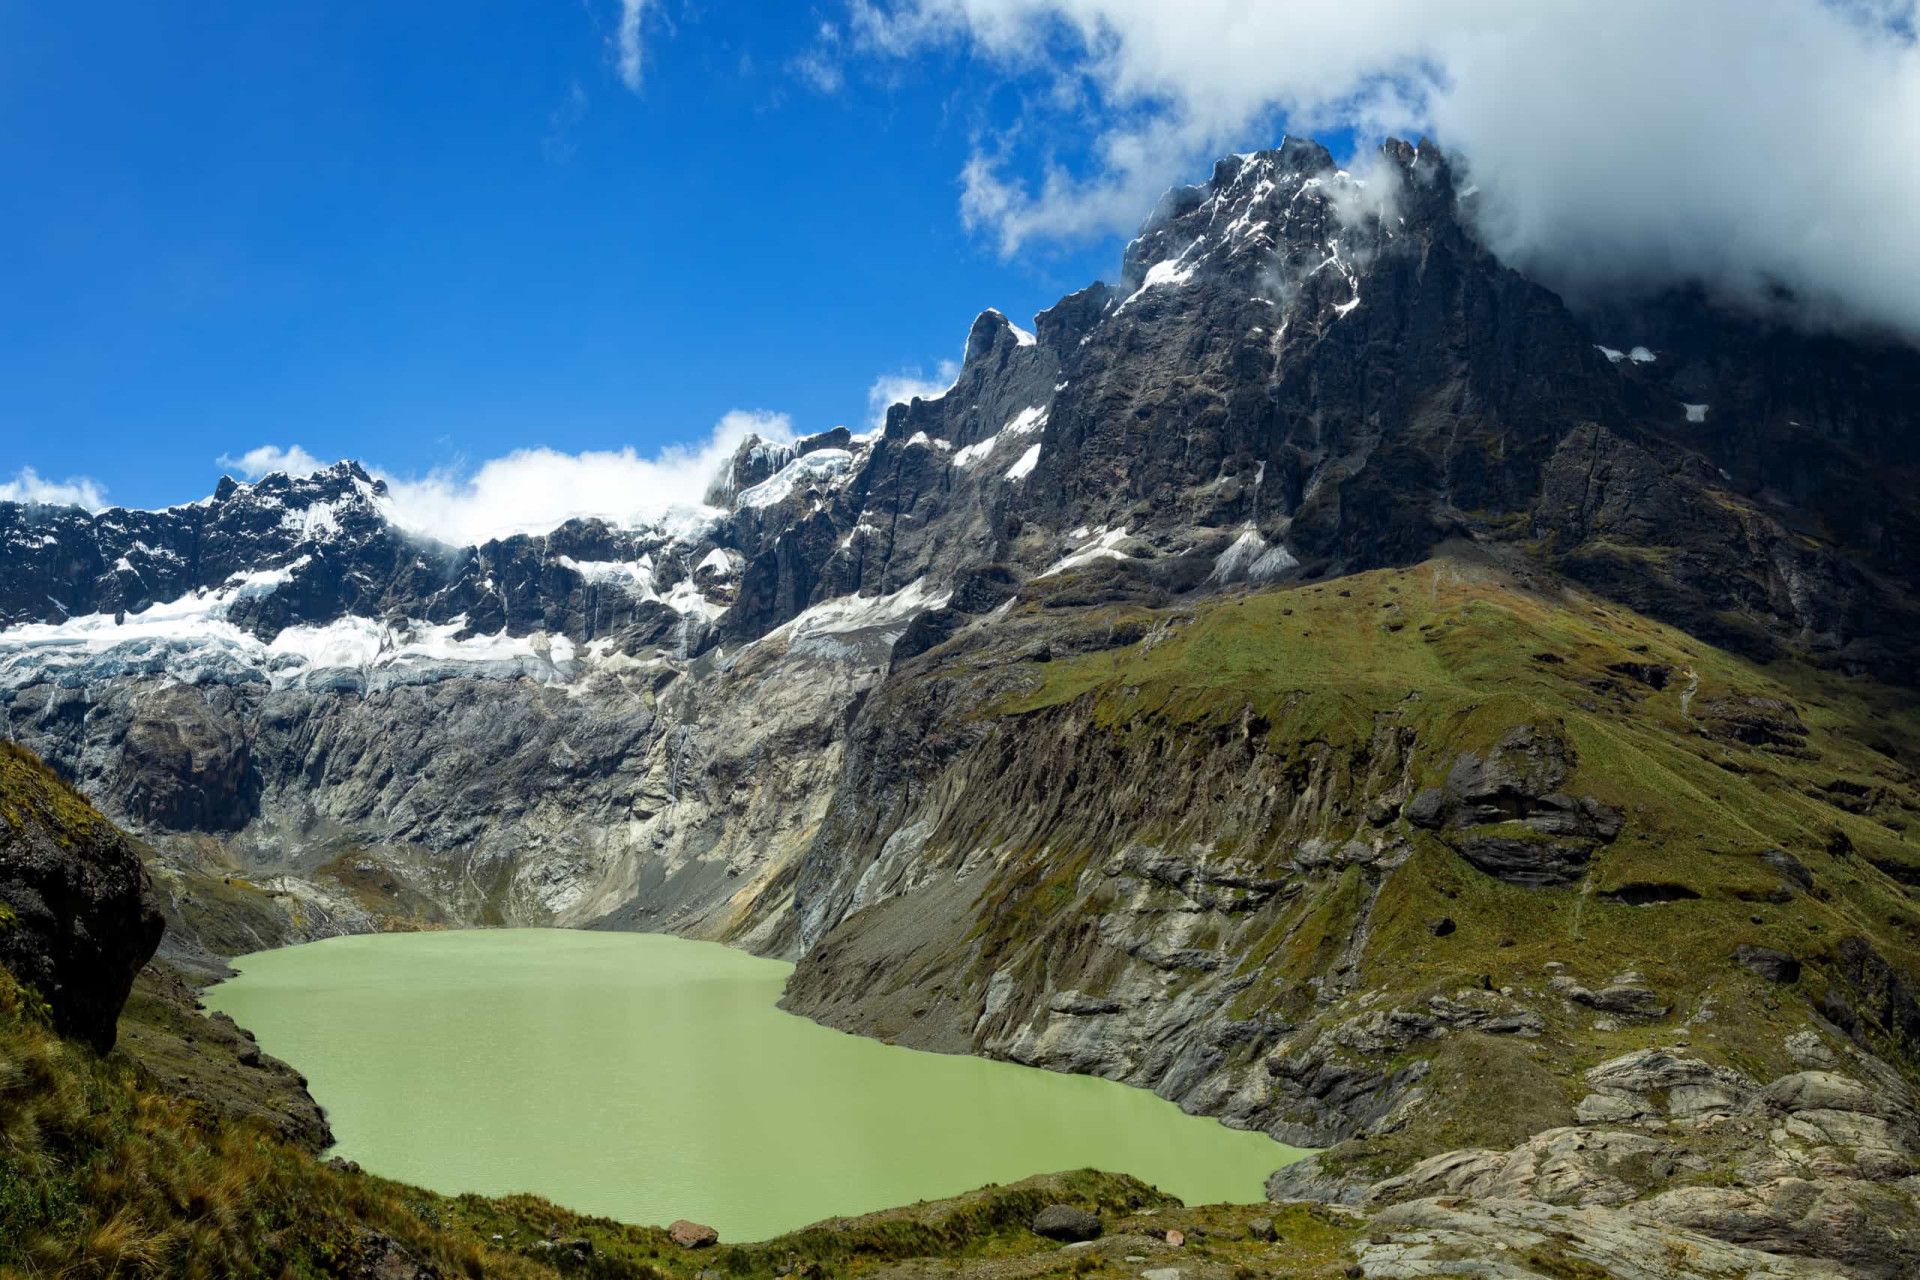 Location: Morono Santiago, Chimborazo, and Tungurahua Provinces<br>Criteria: Natural<br>Year established: 1983<br>Description: An important refuge for rare species of the Andes, including the mountain tapir, the scenic park is equally distinguished for its two active volcanoes.<p><a href="https://www.msn.com/en-us/community/channel/vid-7xx8mnucu55yw63we9va2gwr7uihbxwc68fxqp25x6tg4ftibpra?cvid=94631541bc0f4f89bfd59158d696ad7e">Follow us and access great exclusive content every day</a></p>